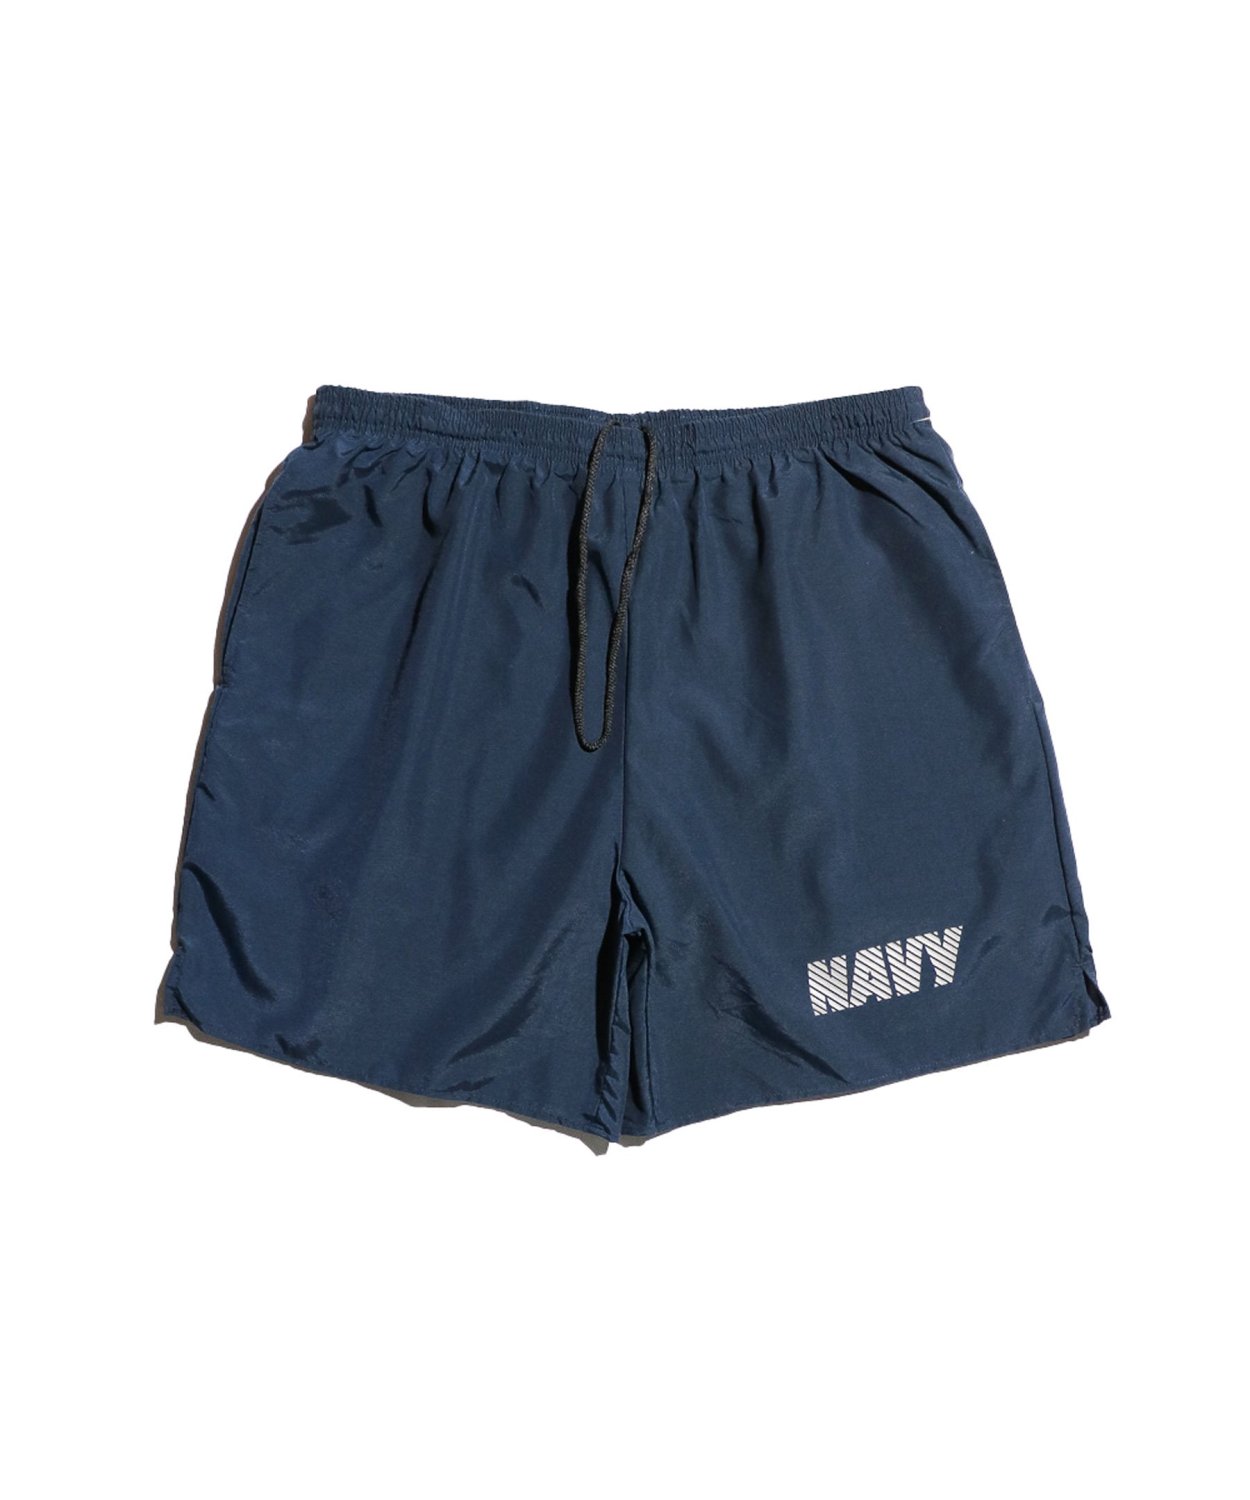 U.S MILITARY / US NAVY TRAINING SHORTS 6INCH DEADSTOCK MADE BY SOFFE